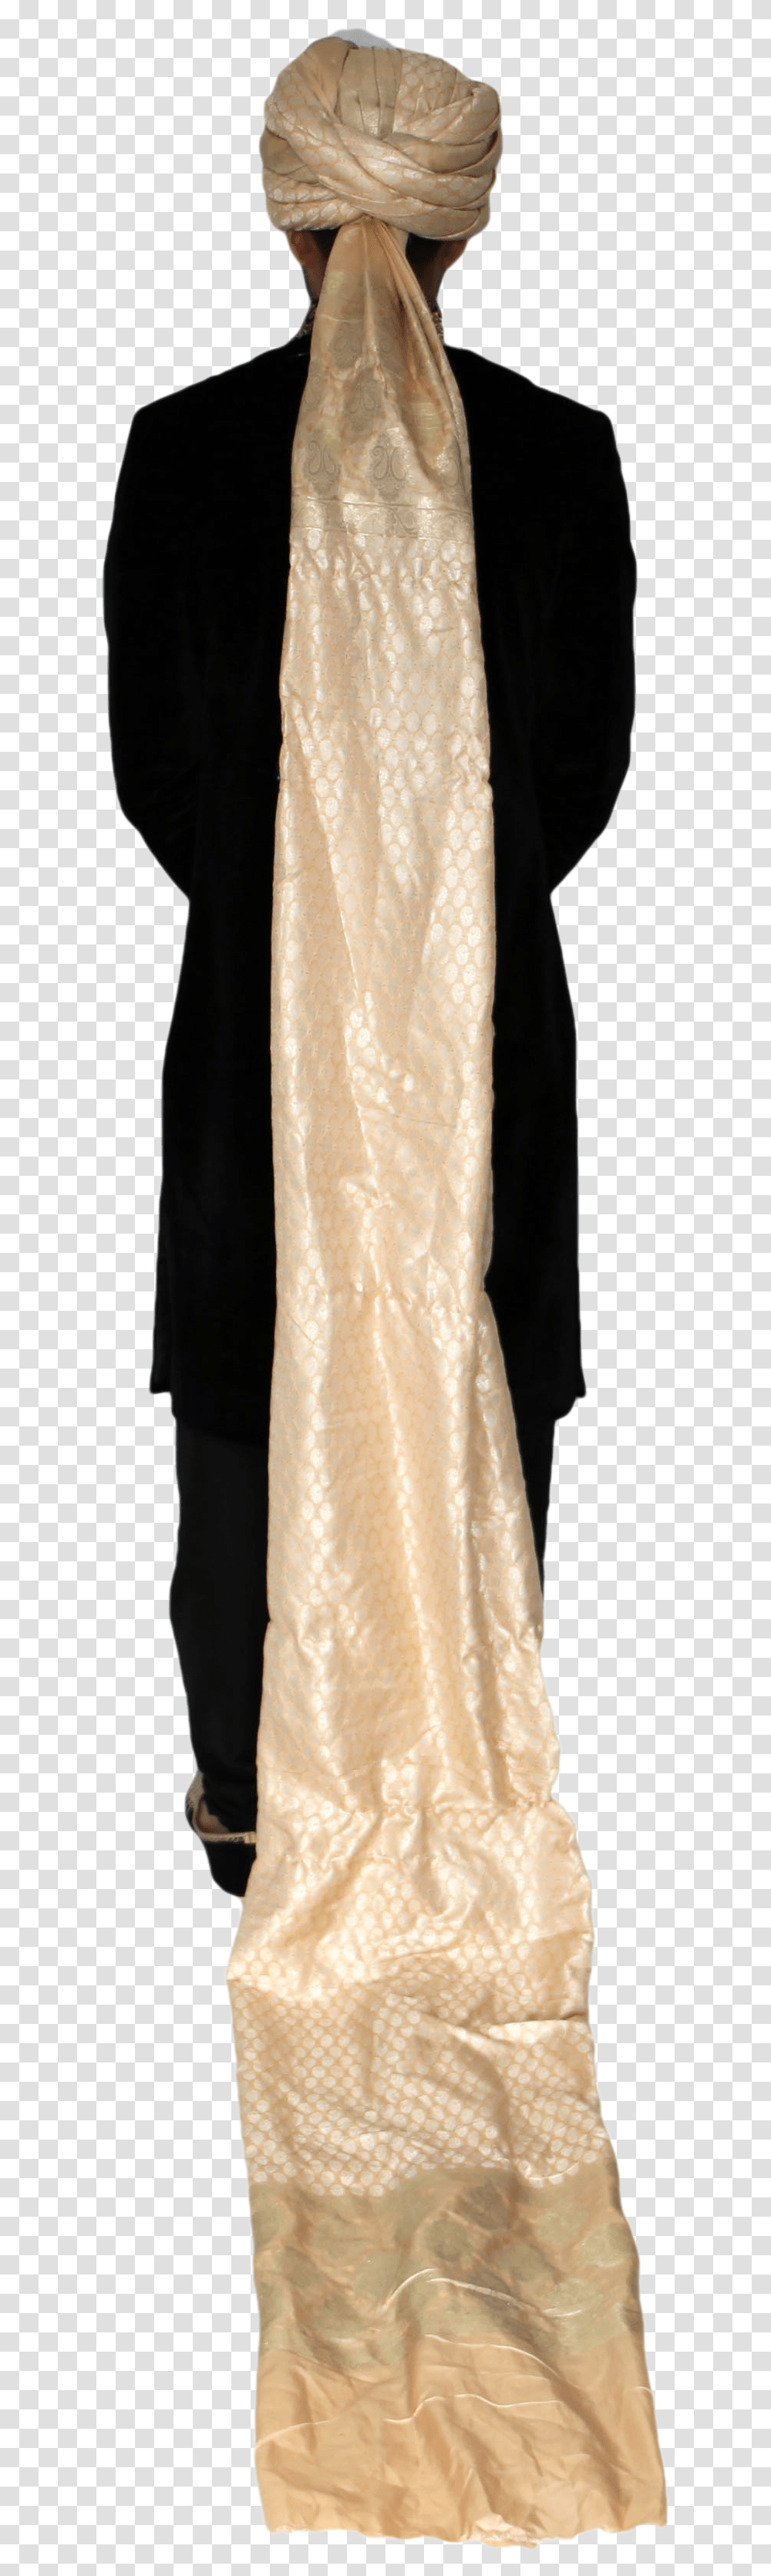 Gold And Champagne Patterned Turban Safa Hat Cape, Apparel, Scarf, Stole Transparent Png